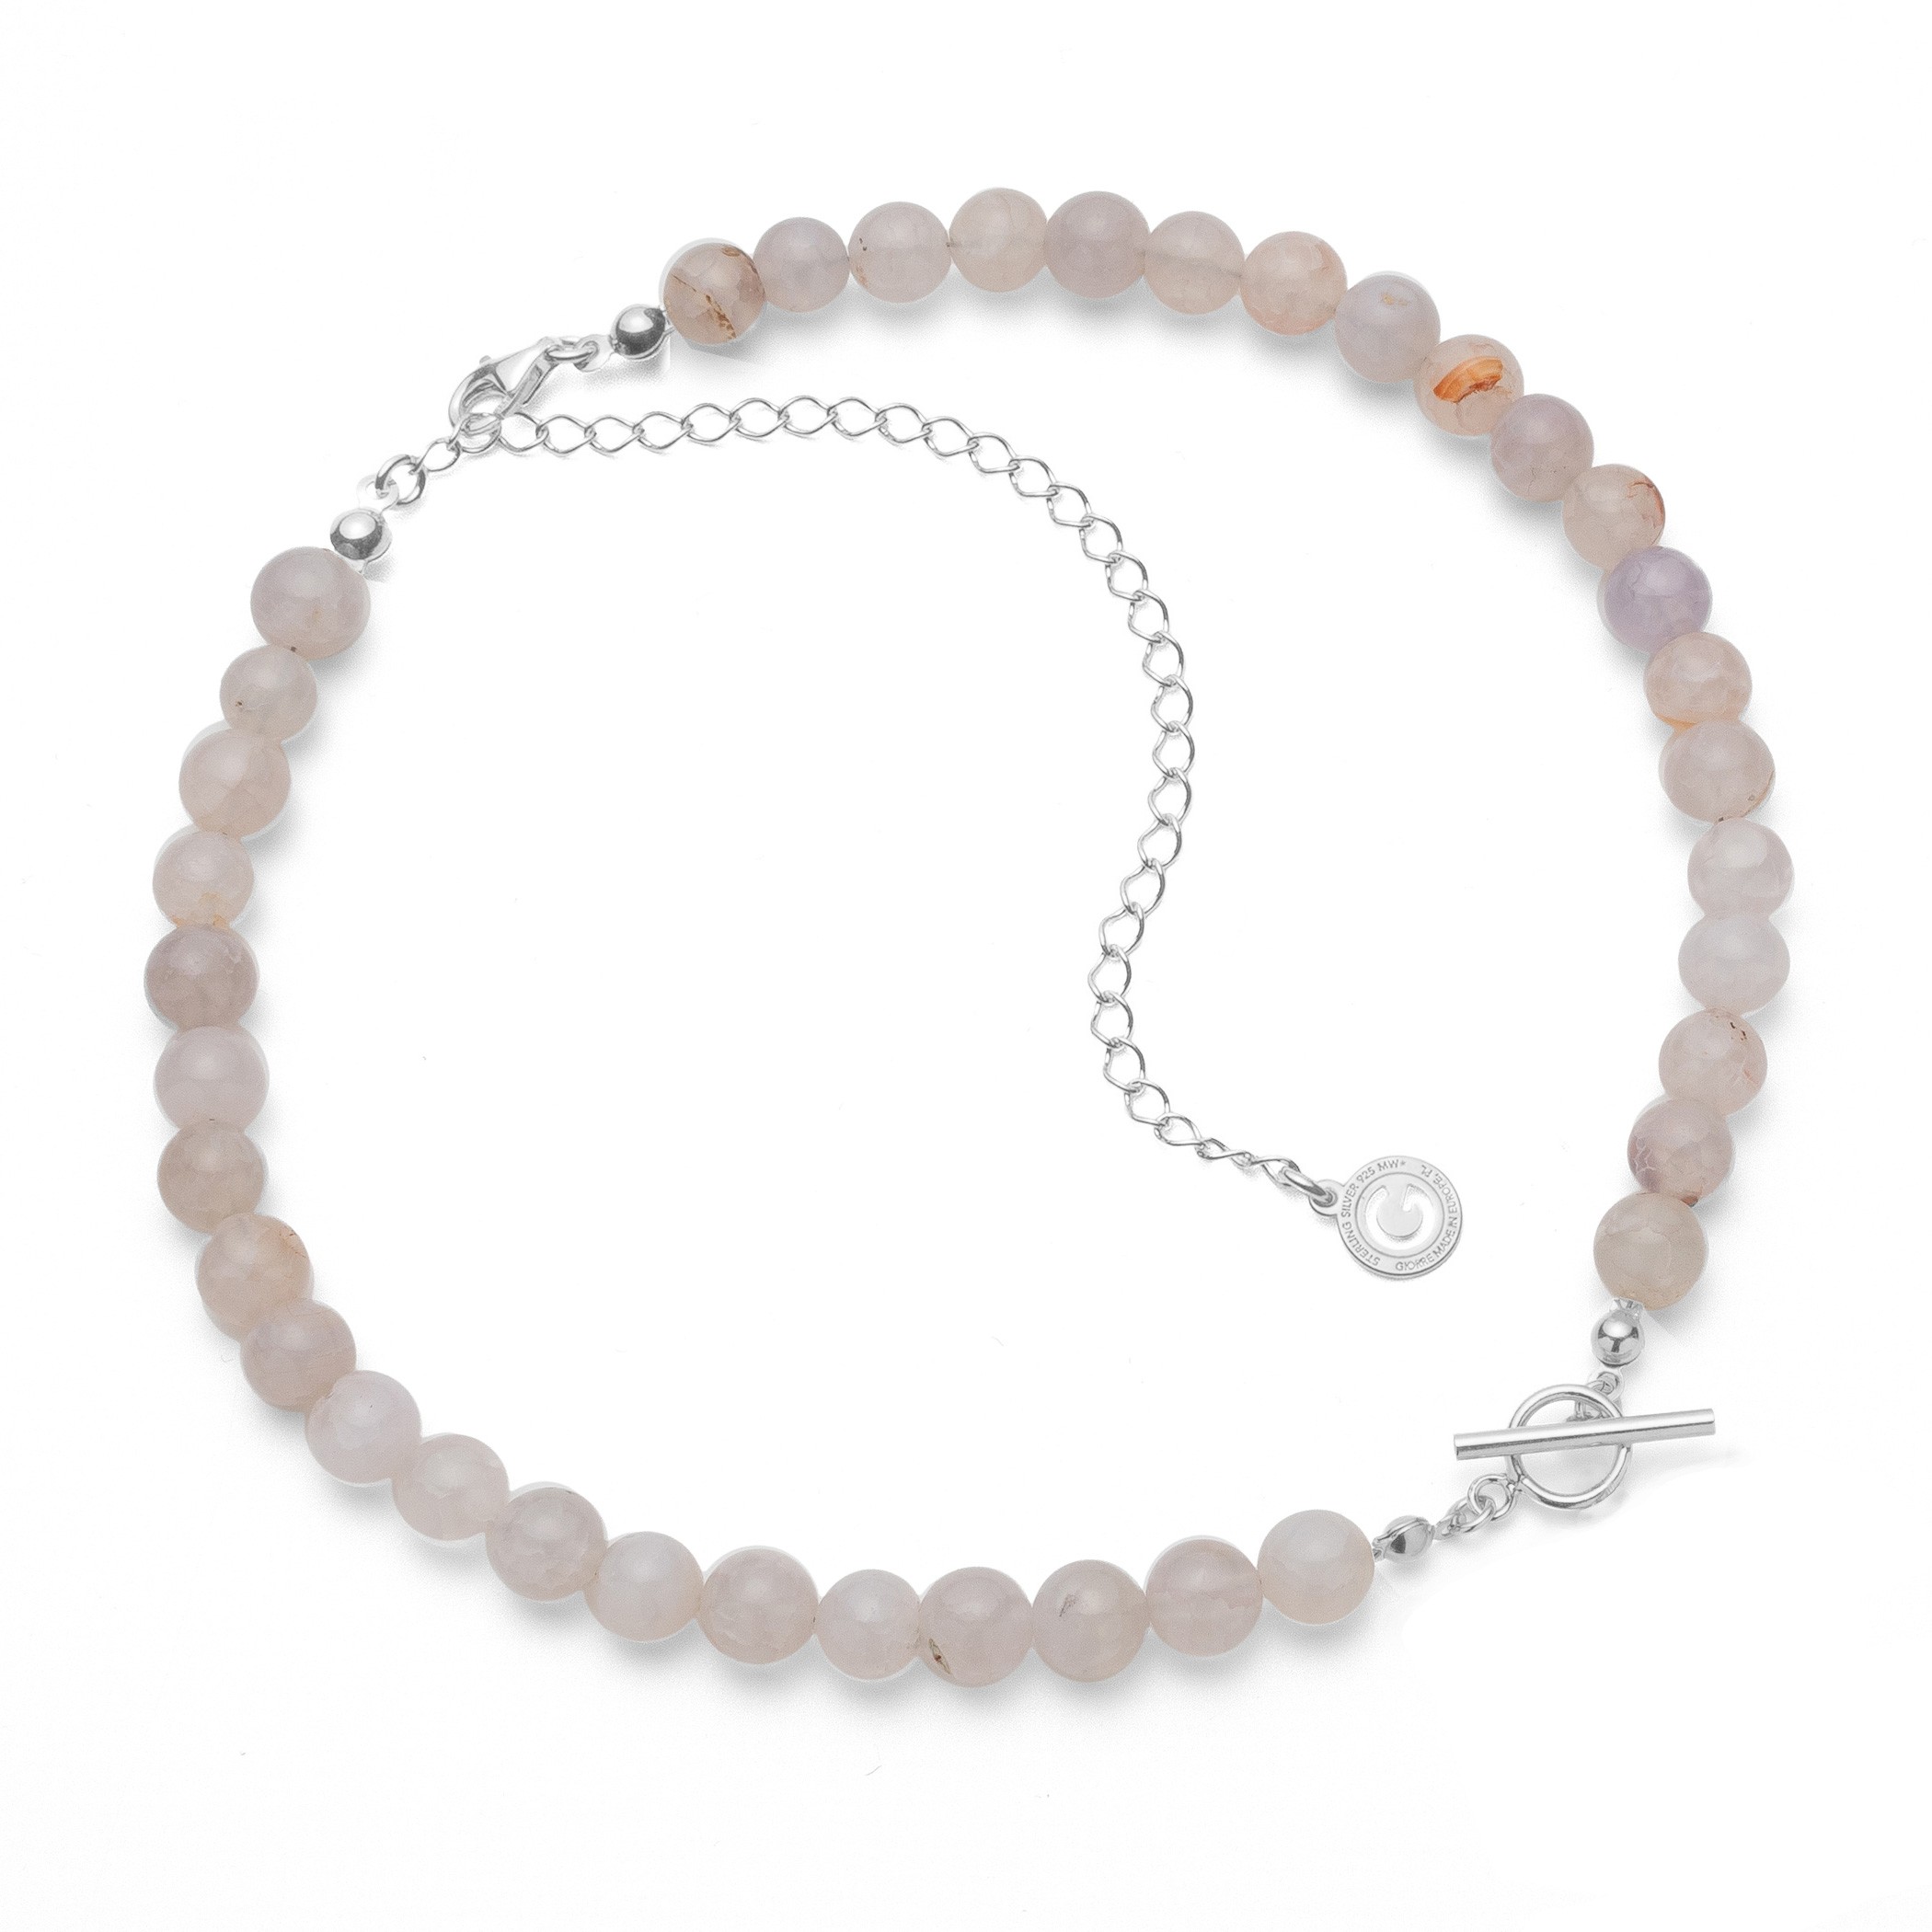 Choker with white natural stones agate, charms base, Silver 925